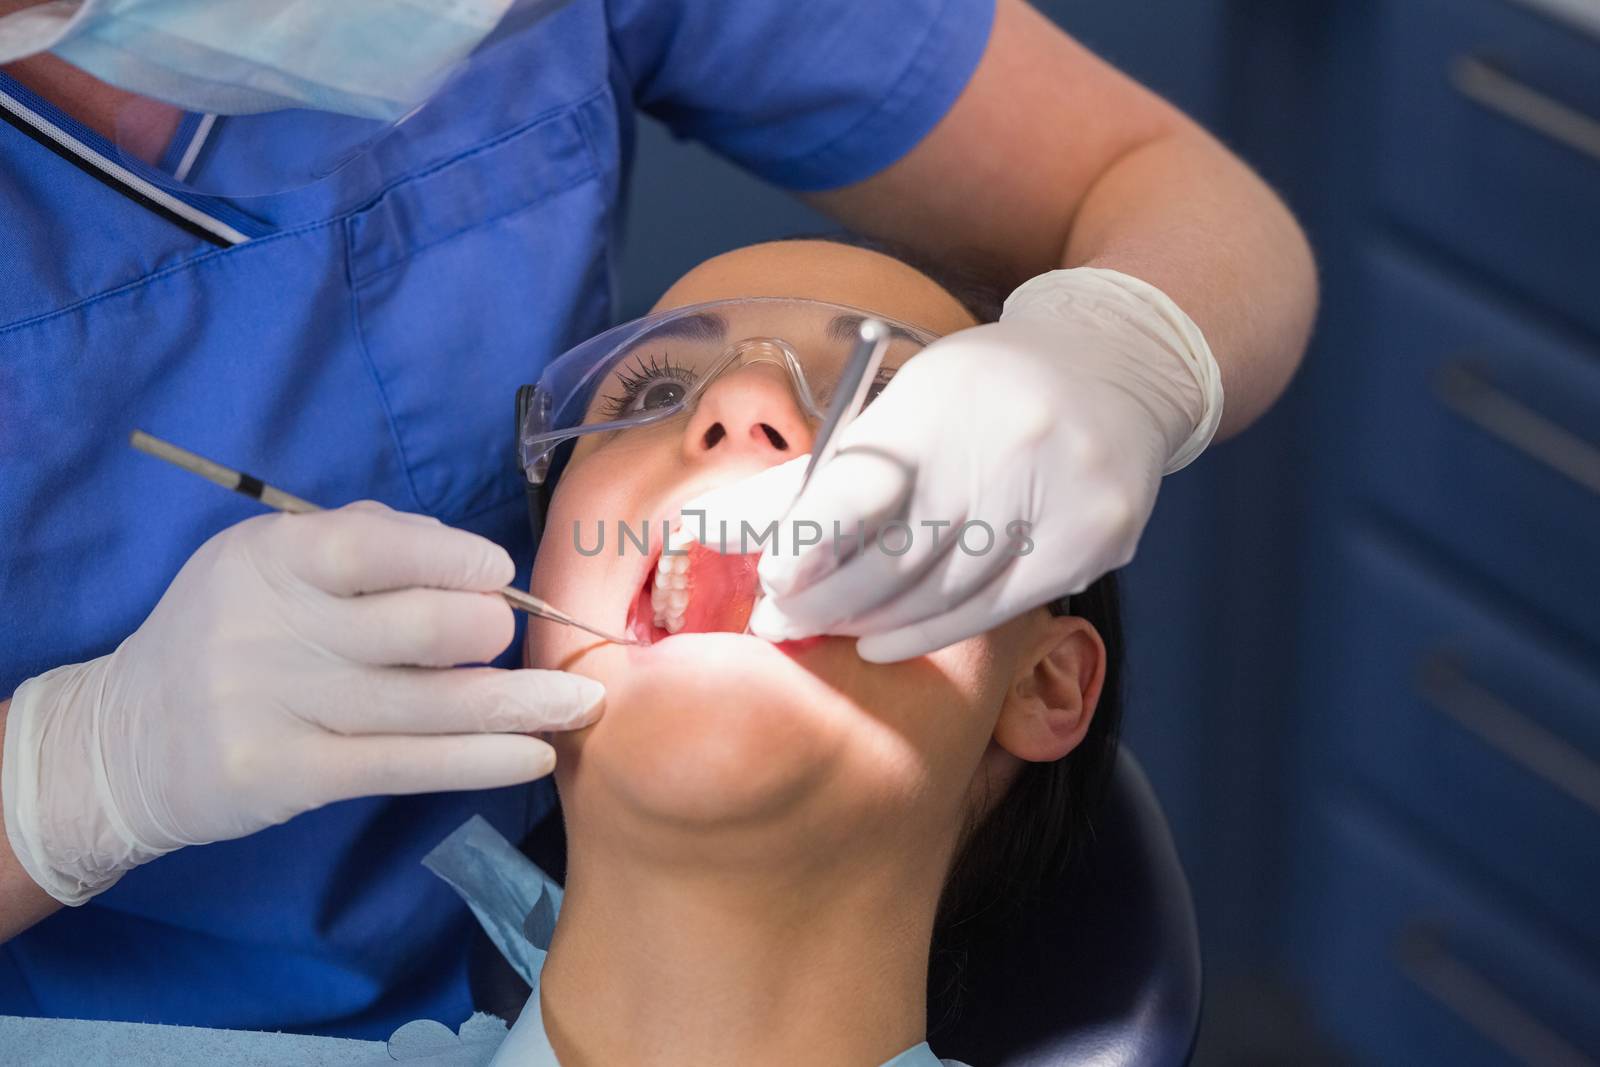 Dentist examining a patient with angle mirror and sickle probe by Wavebreakmedia